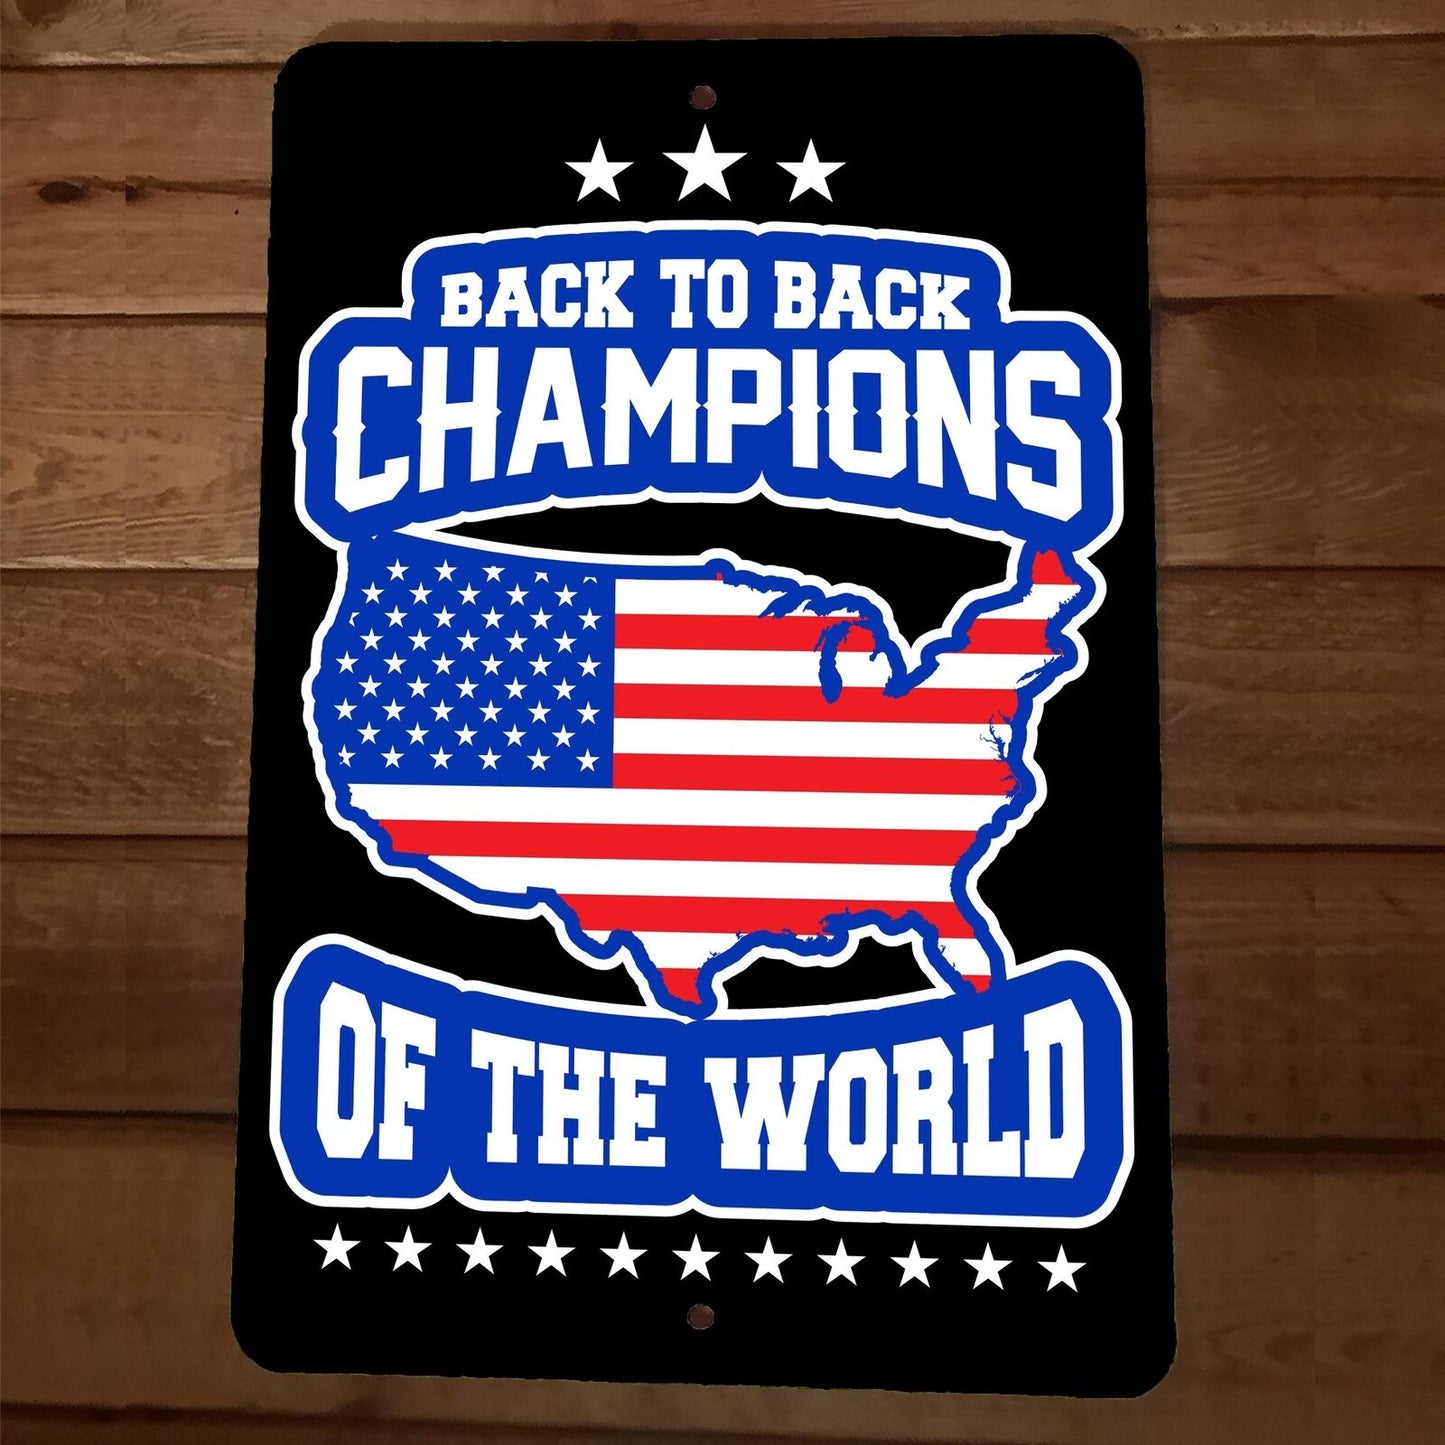 Champions of the World USA America 8x12 Metal Wall Sign Poster July 4th